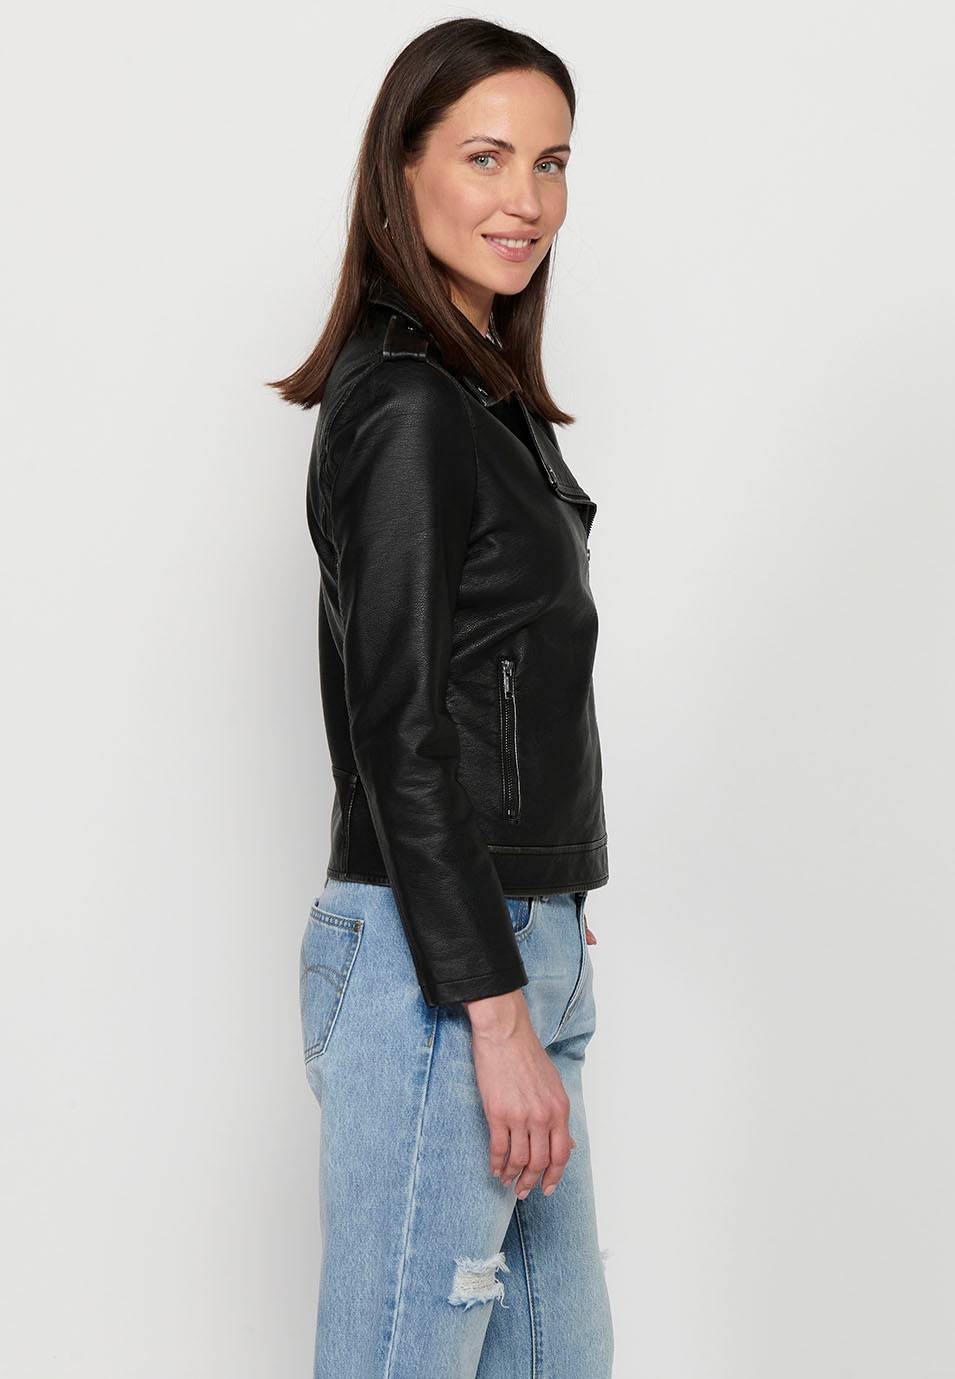 Leather-effect double-breasted jacket with lapel collar and front zipper closure in Black for Women 4